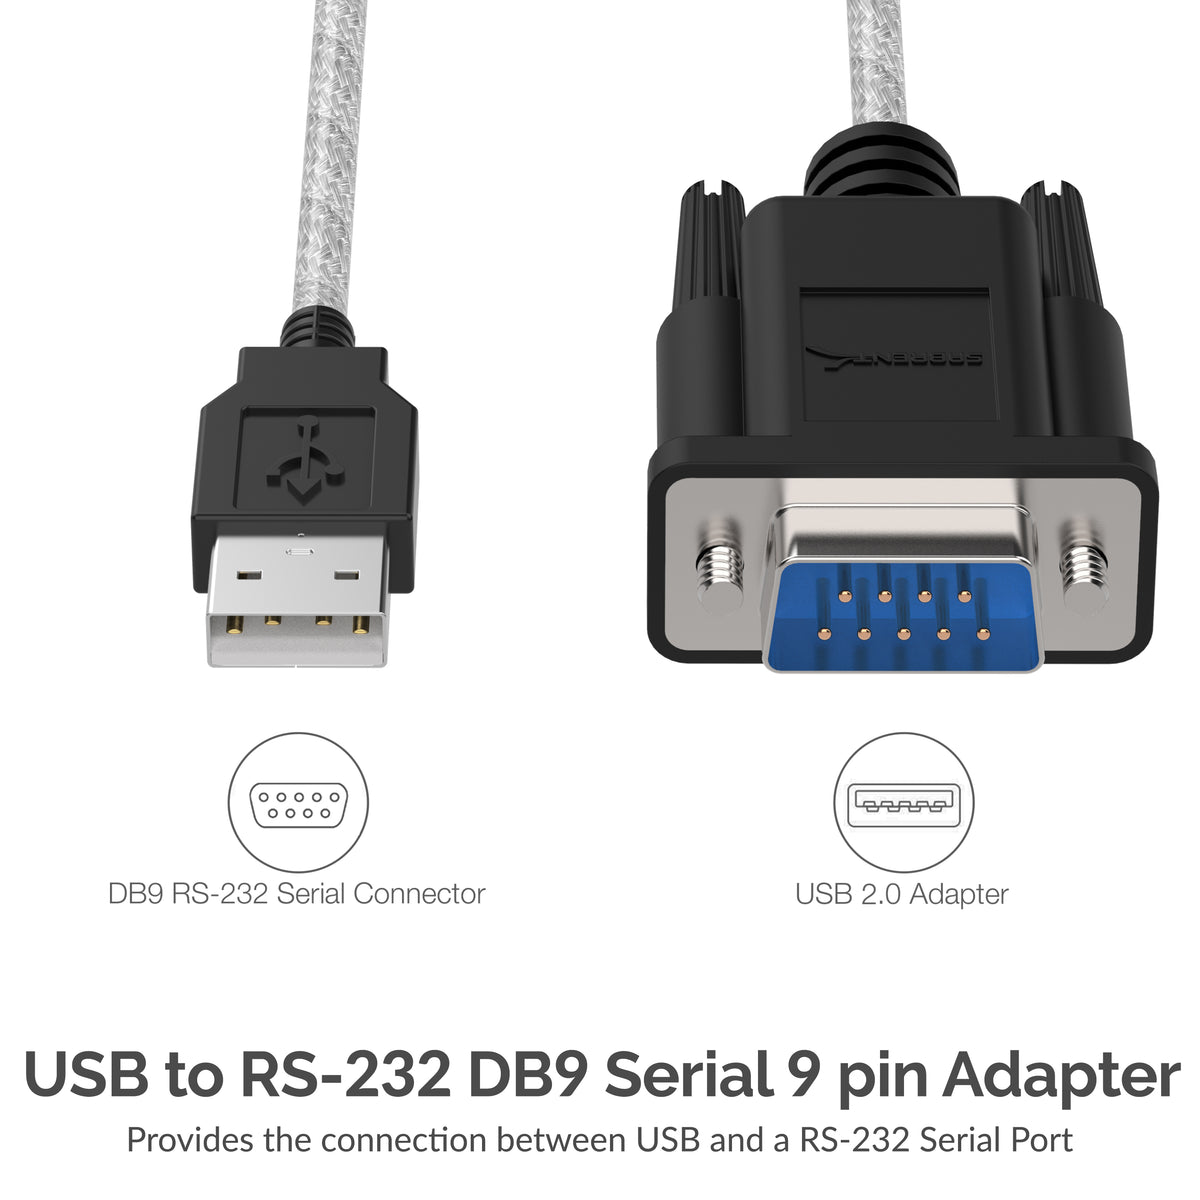 USB to RS-232 DB9 Serial 9 pin Adapter (Prolific PL2303)